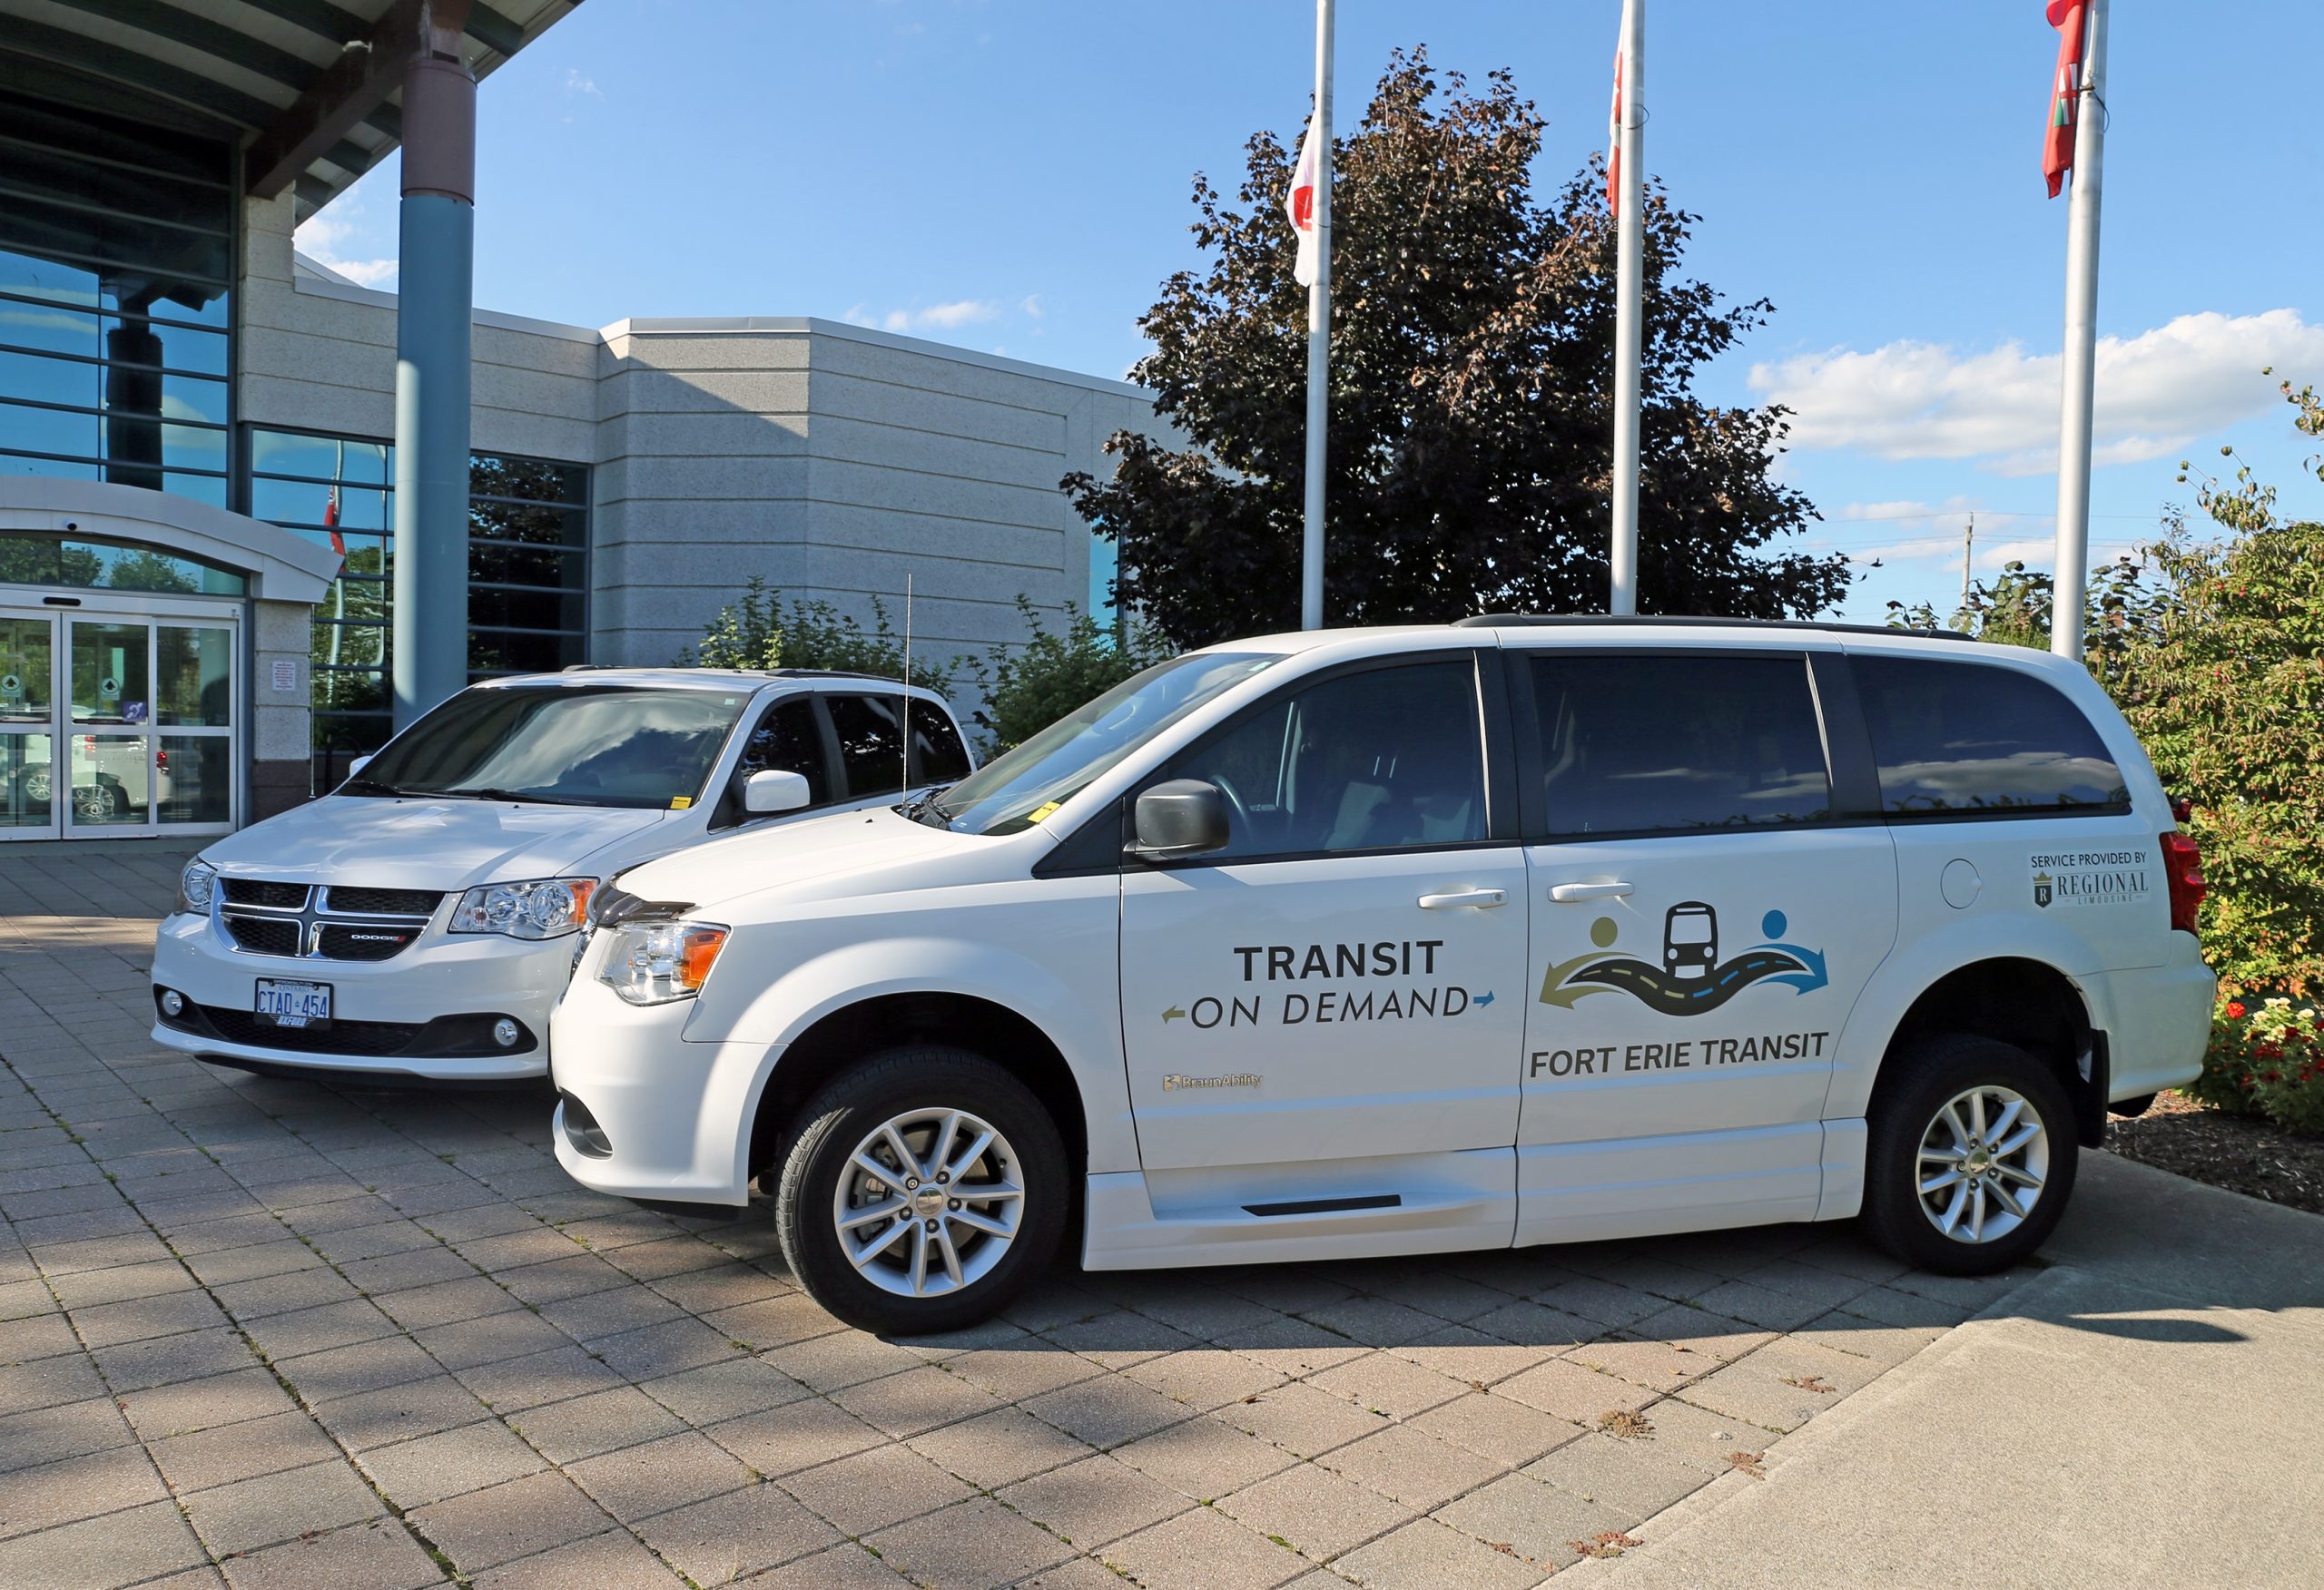 Covering Rural and Urban Areas with On-Demand Transit